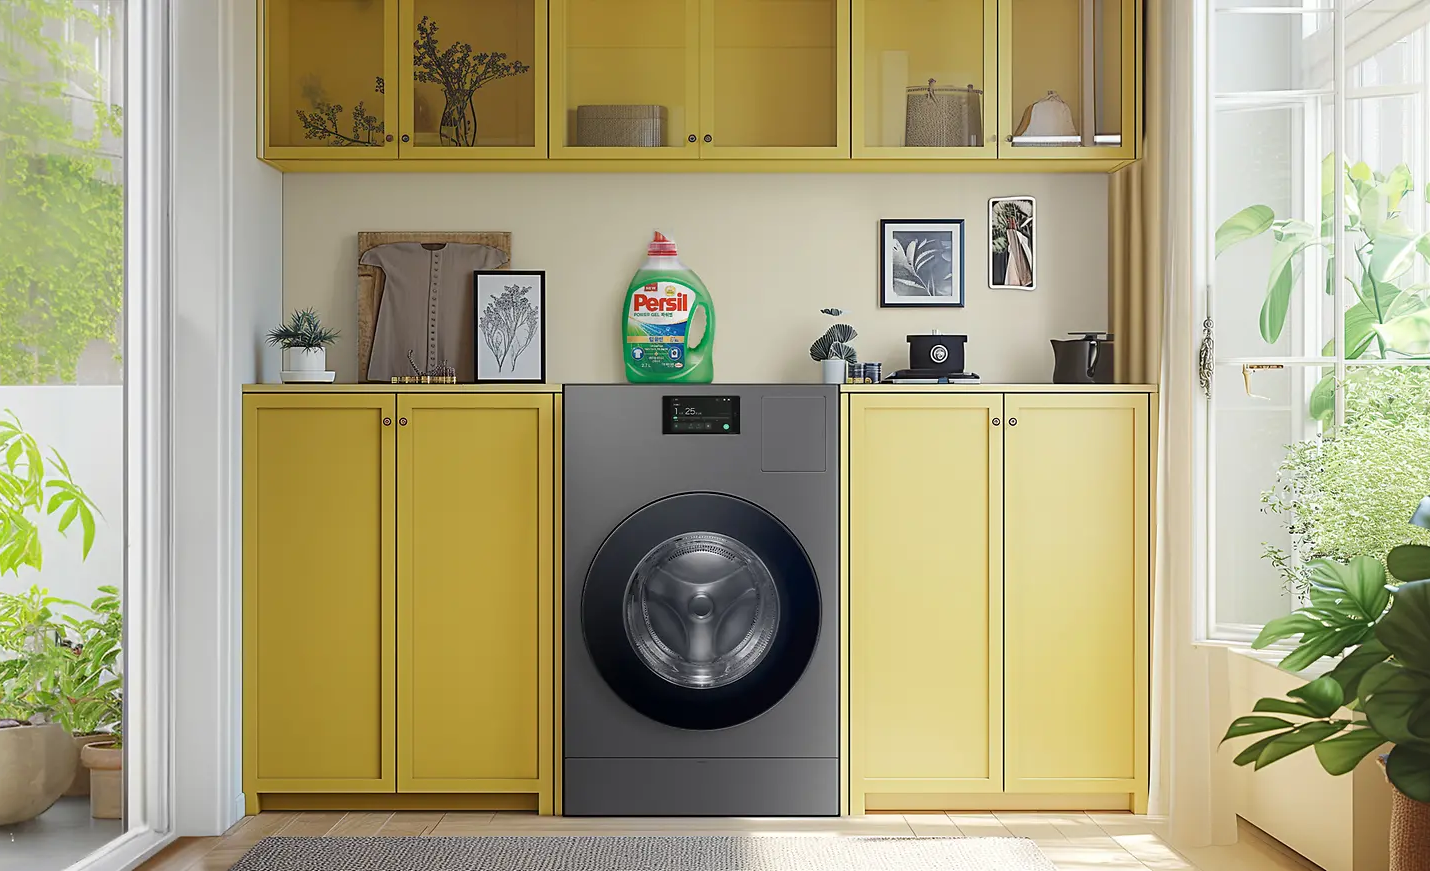 Henkel, Samsung team up for 60% cut of energy consumption in washing cycles